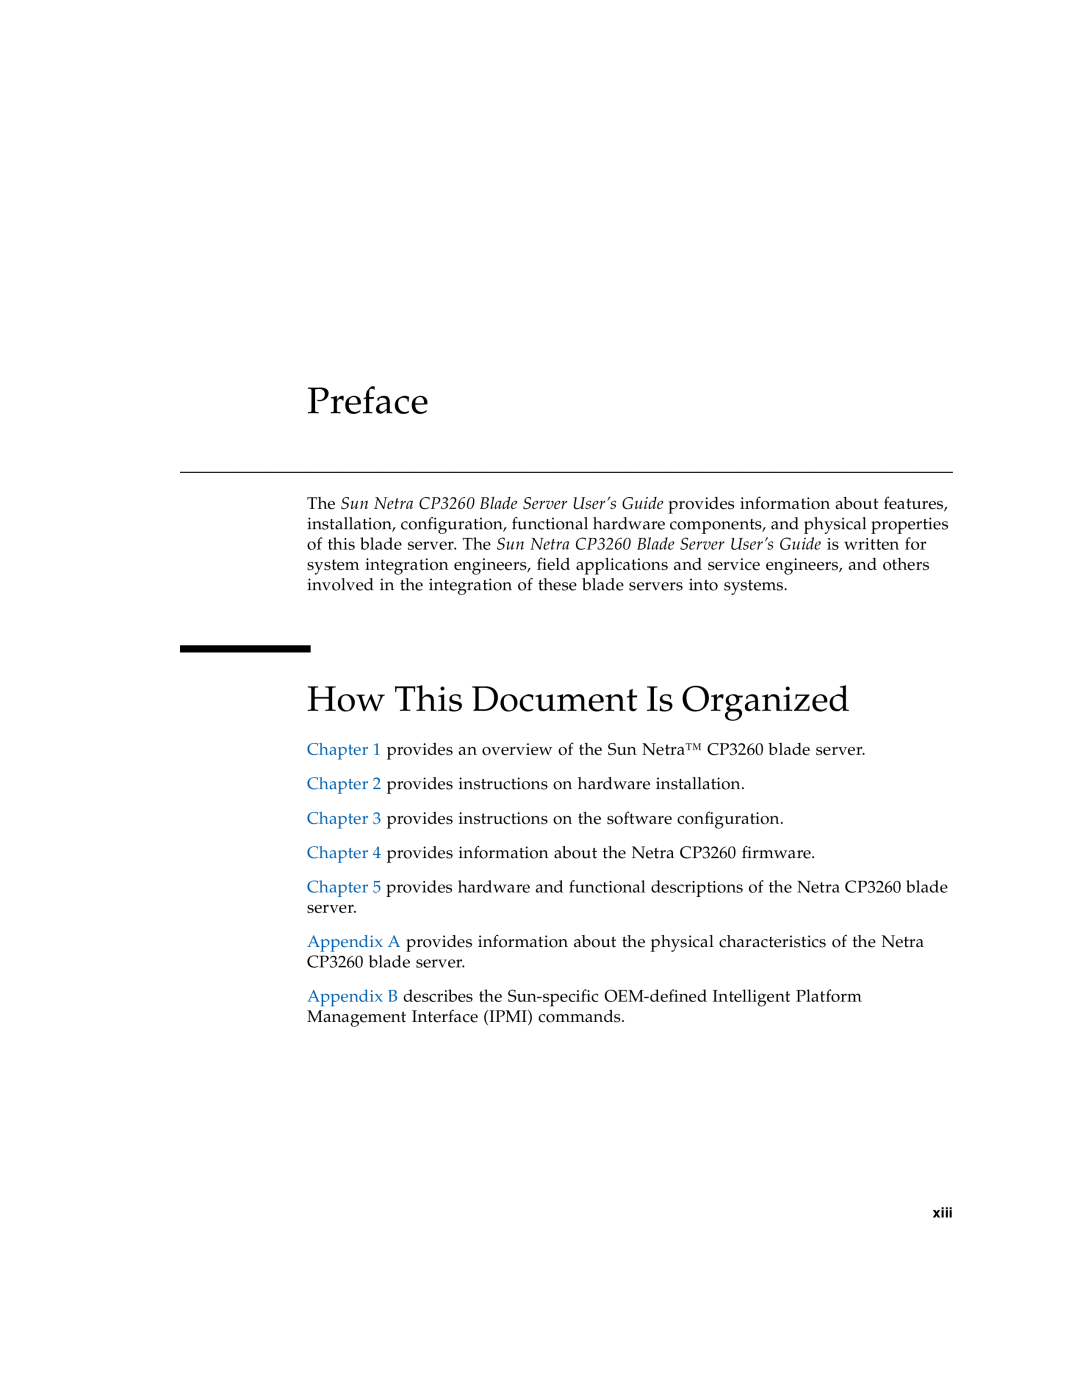 Sun Microsystems CP3260 manual Preface, How This Document Is Organized 